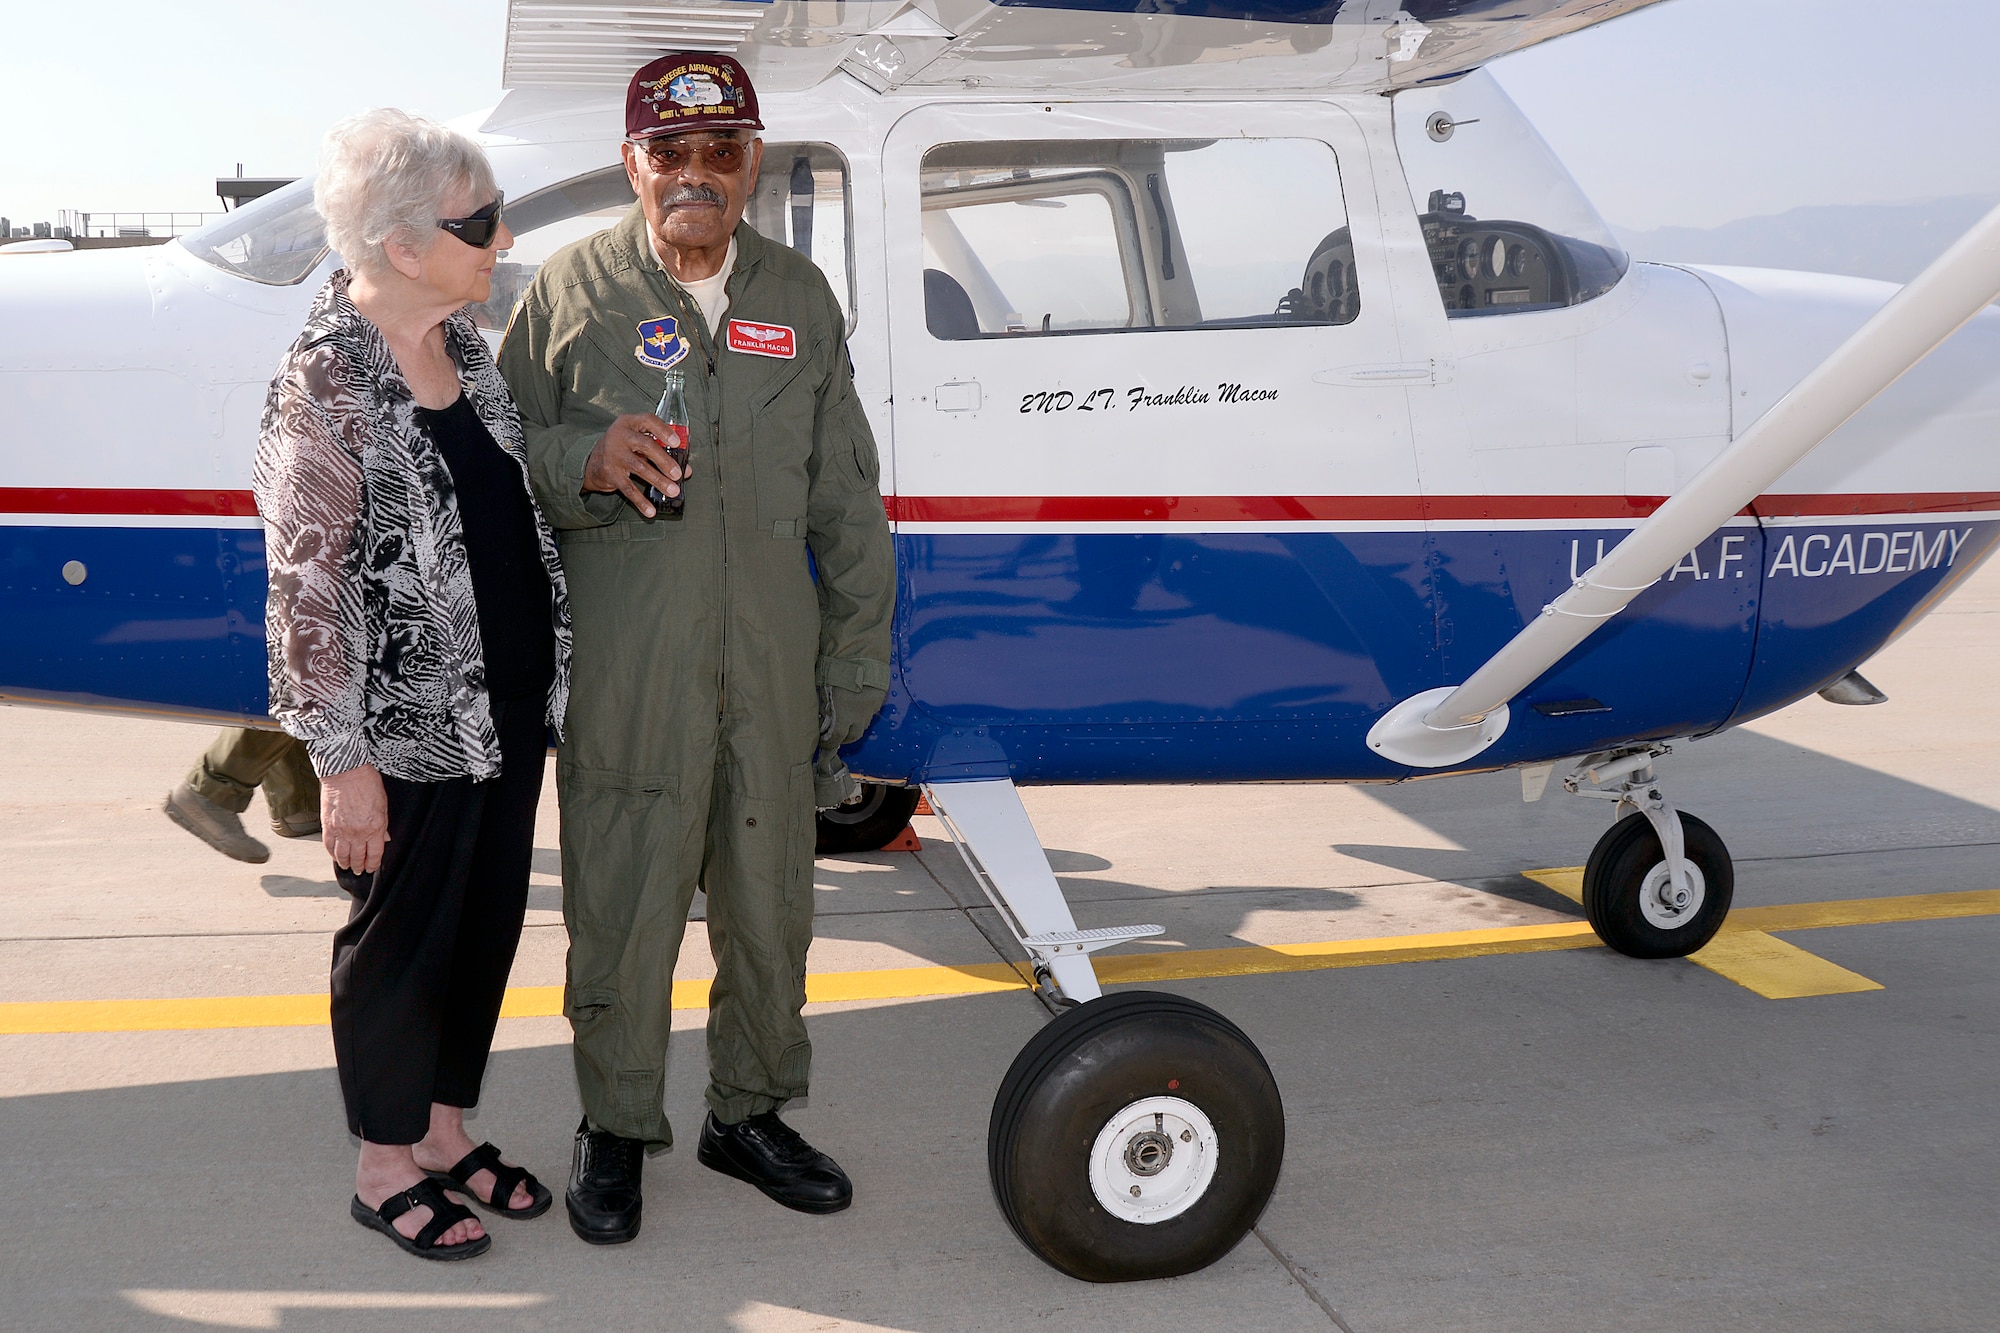 Franklin Macon, a Tuskegee Airman, stands with his girlfriend Amy Lee, on the U.S. Air Force Academy airfield in Colorado, Aug. 25, 2015. Macon had just taken a flight with Cadet 1st Class Scott Lafferty in one of the cadet flying team’s T-41s. (U.S. Air Force photo/Mike Kaplan)